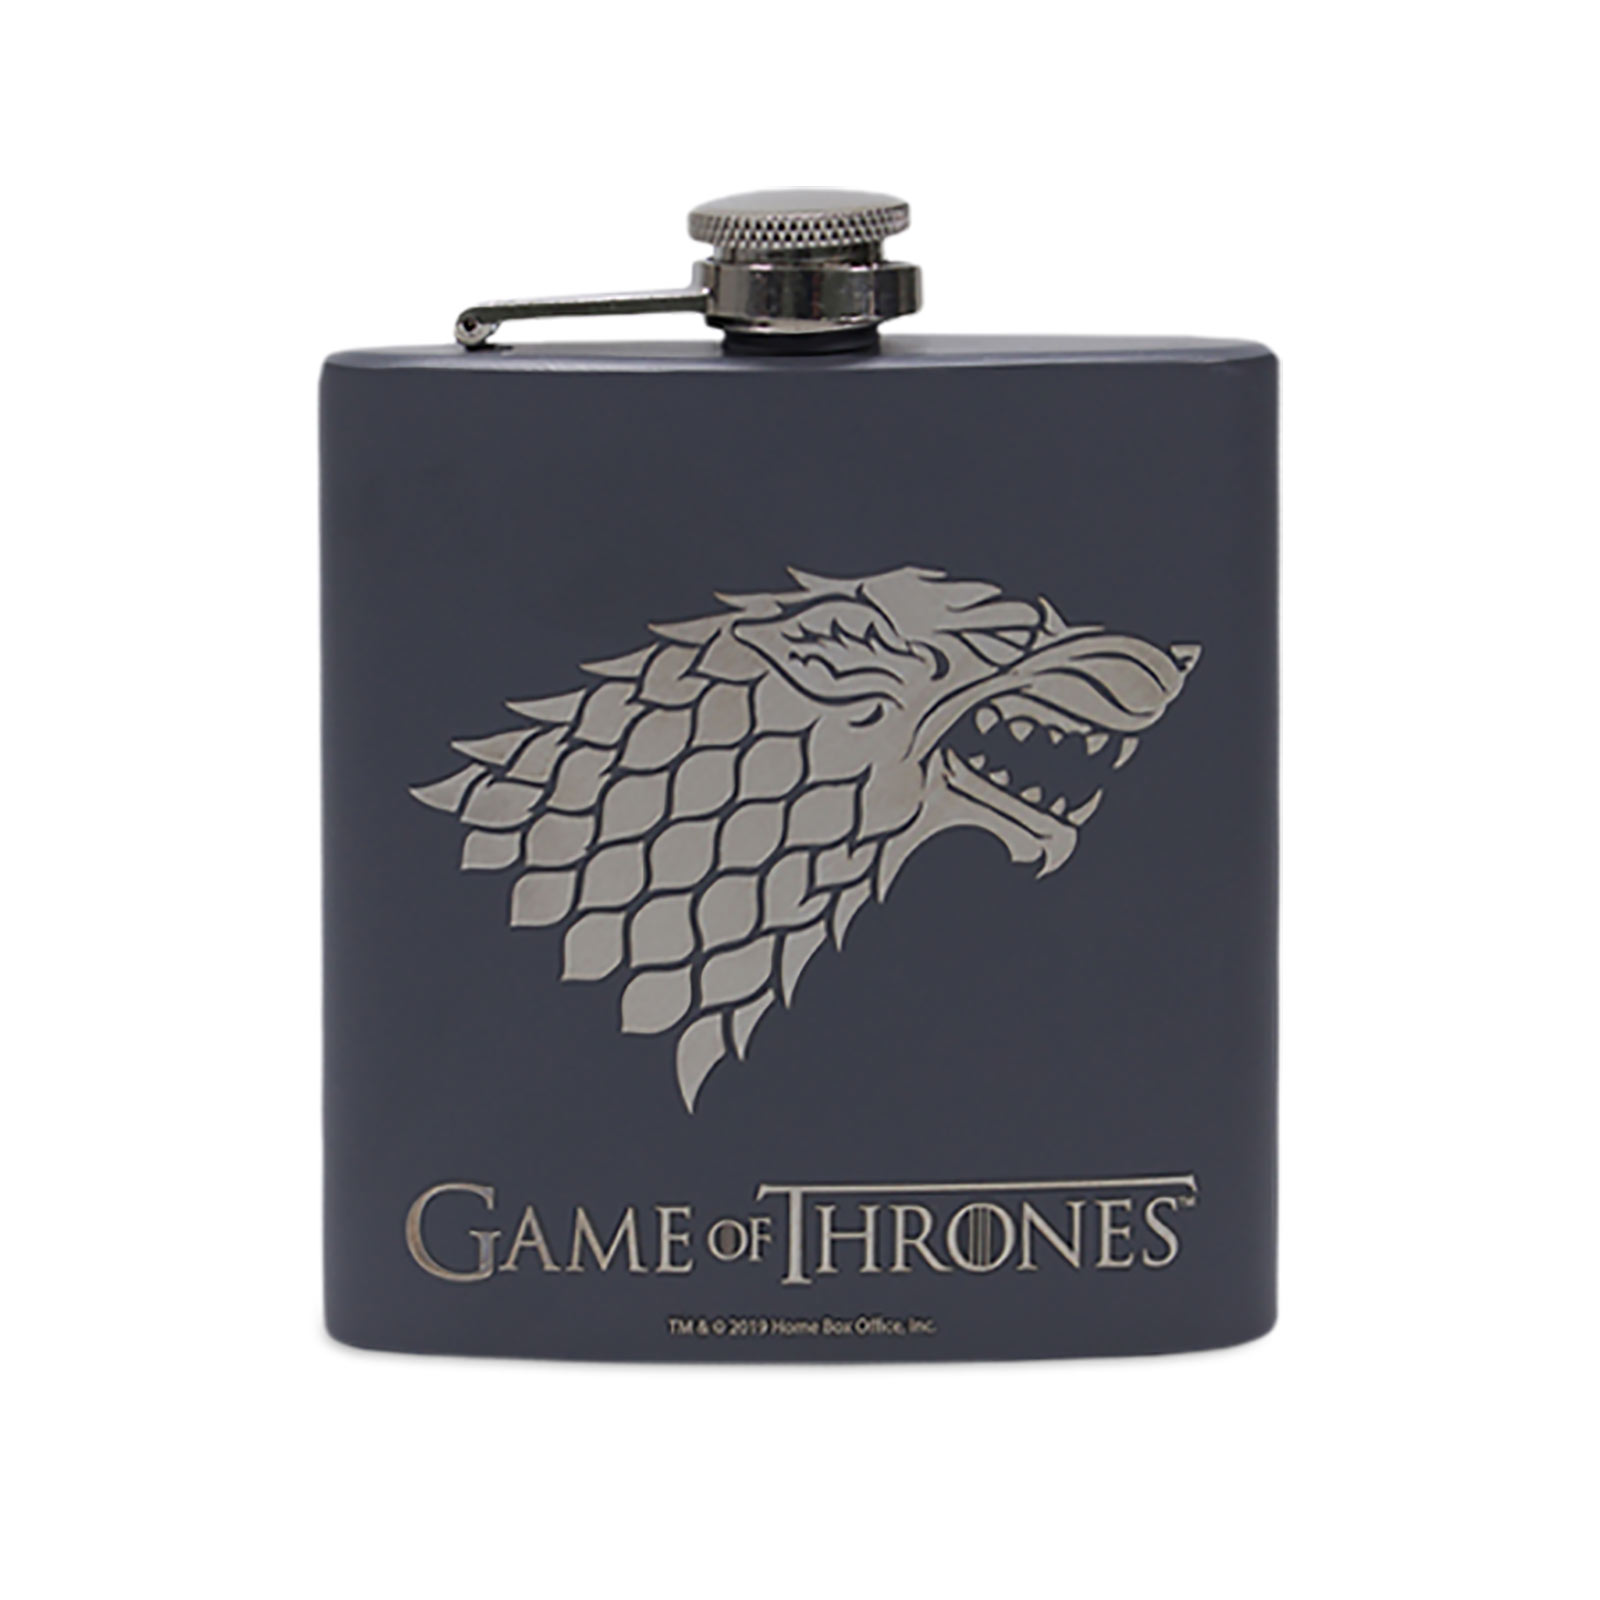 Game of Thrones - Stark L'hiver arrive Flasque